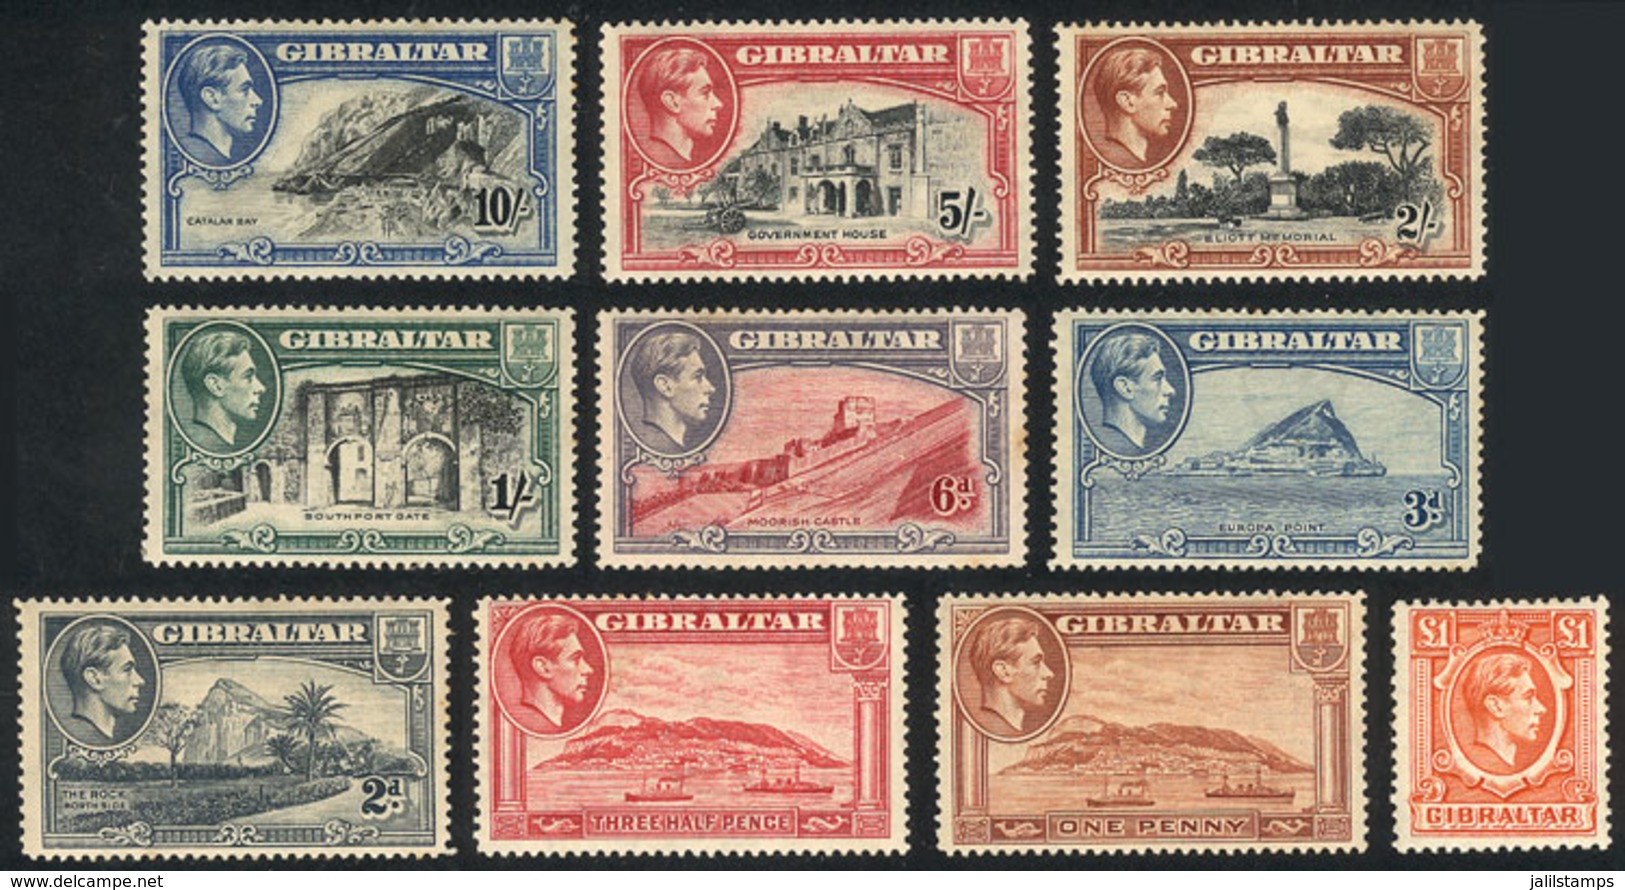 GIBRALTAR: COMPLETE SET WITH PERFORATION 14: Sc.108a + 109 + 110a + 111a + 113a + 114a + 115a + 116a + 117a, The 9 Value - Gibraltar